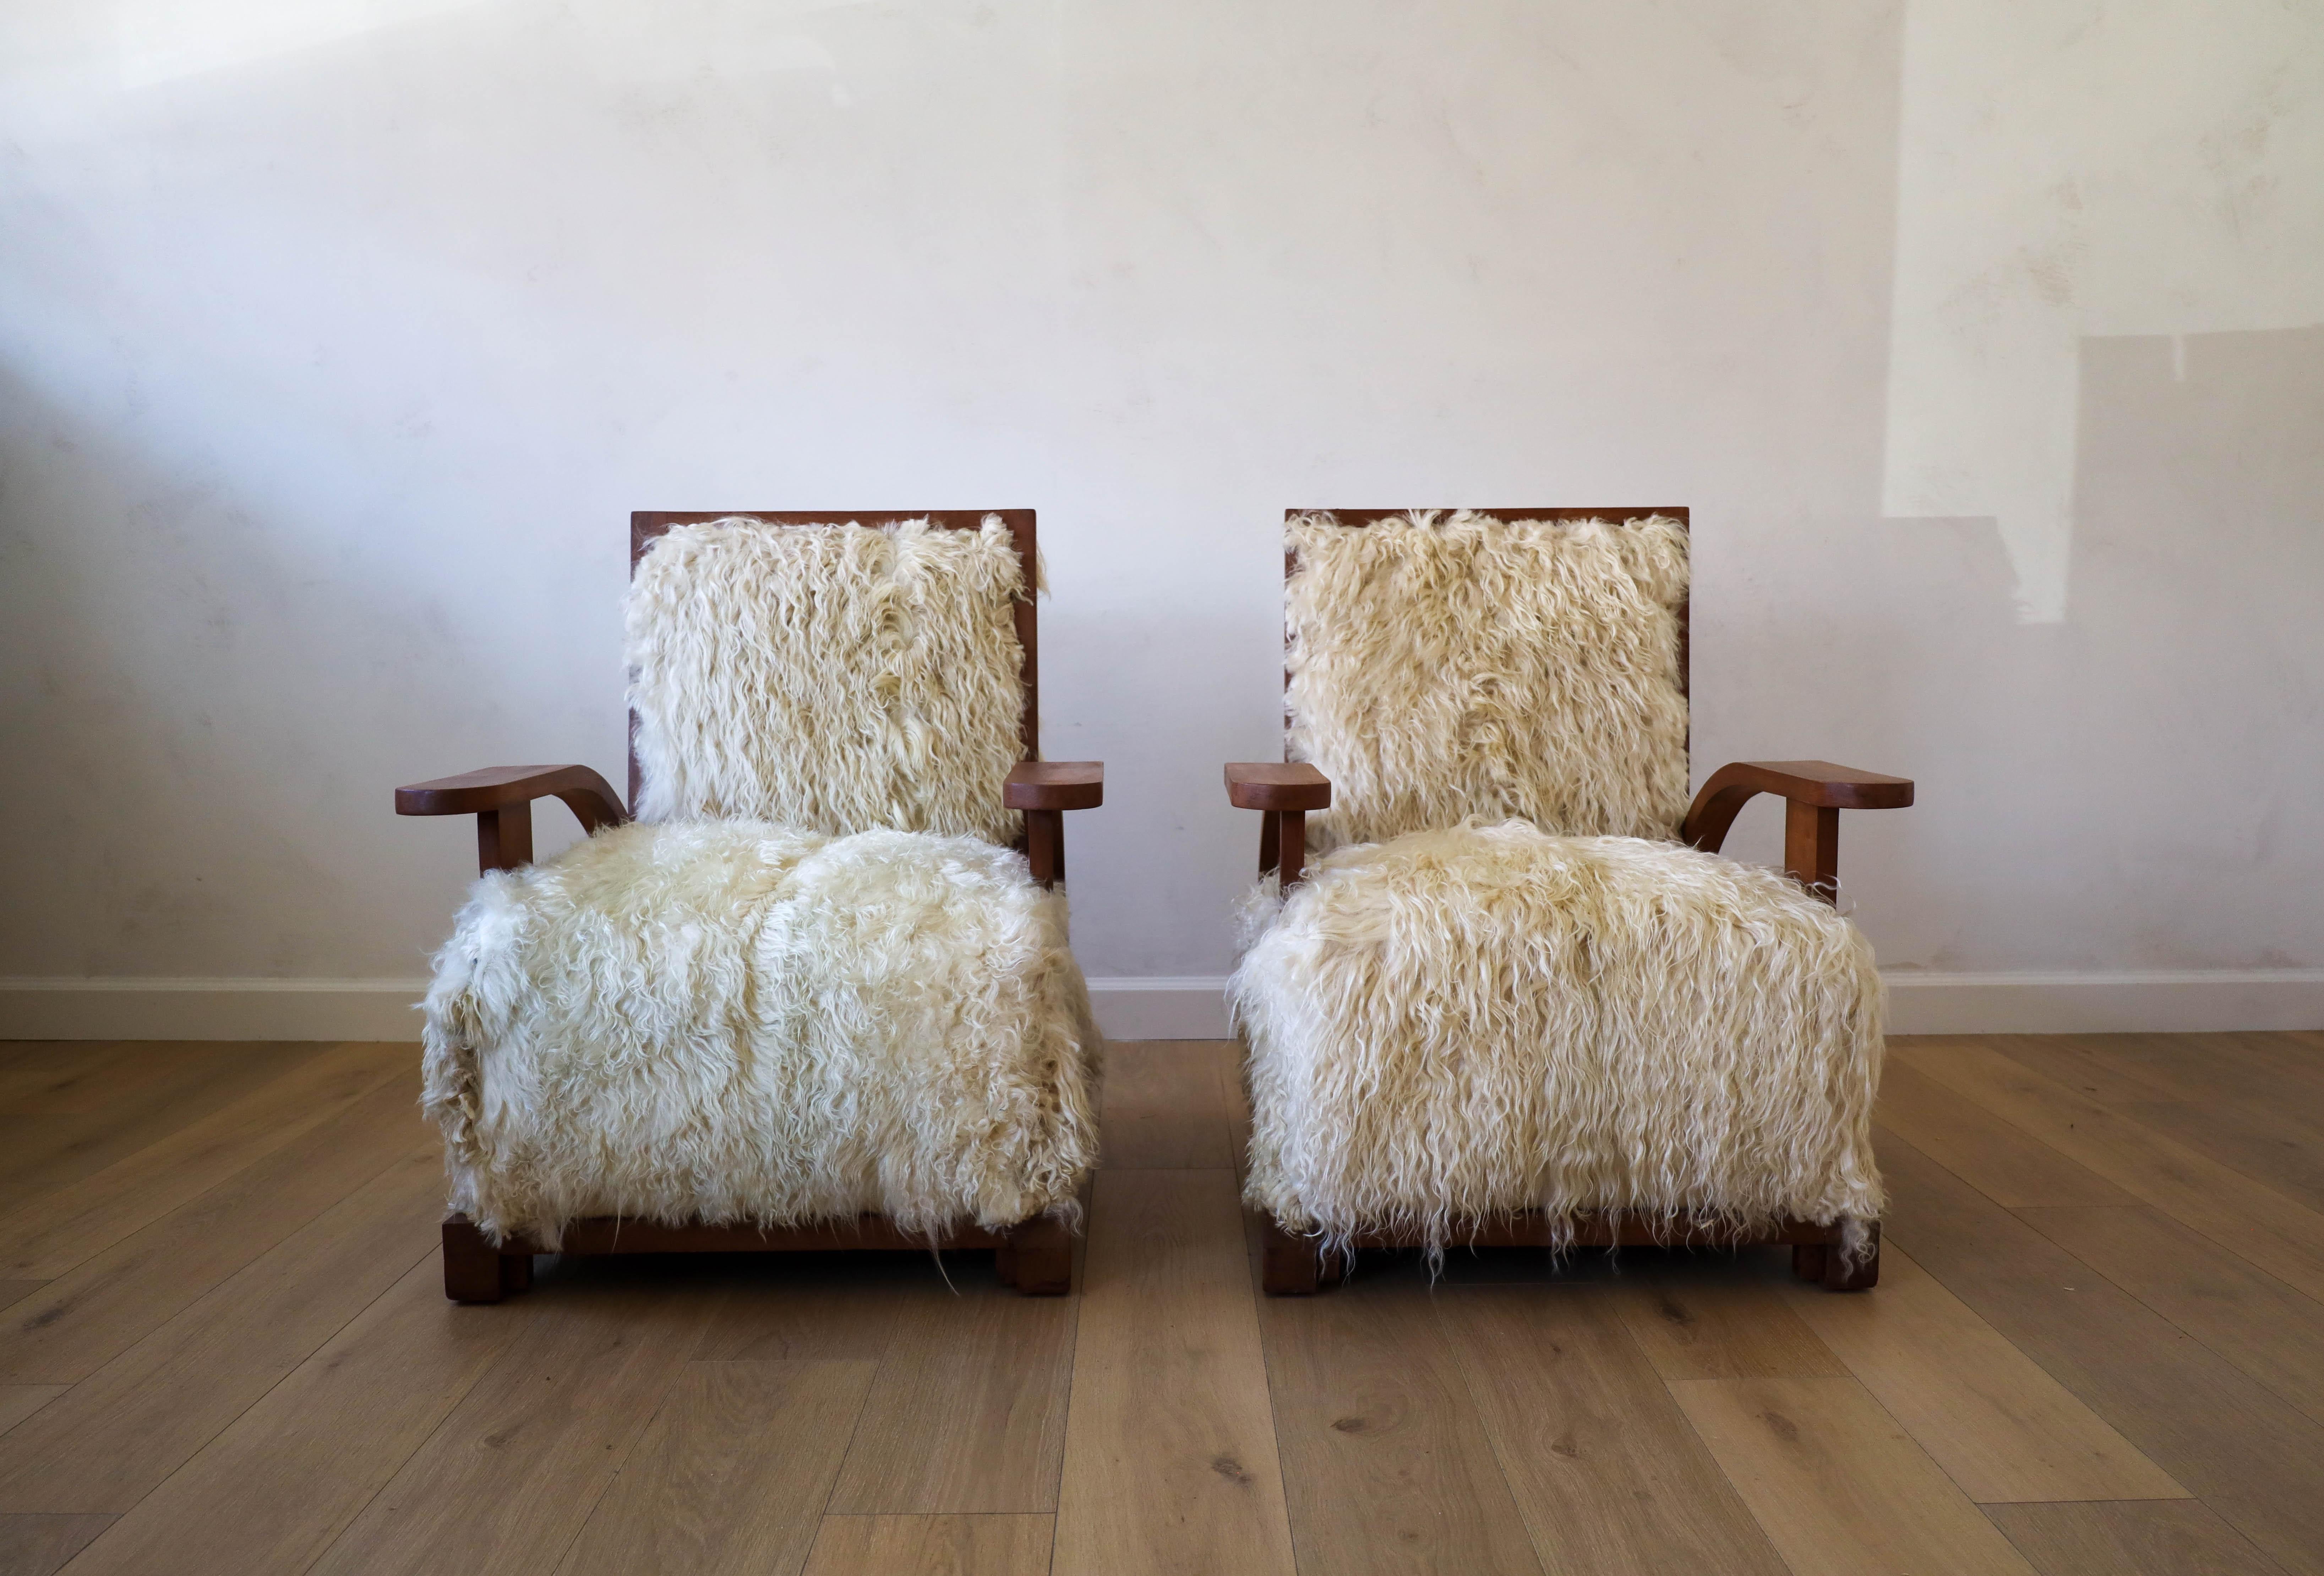 One of a kind Art Deco Club Chairs, reimagined in lush Angora Goatskin, certain to be the conversation piece of the room. We hand selected each individual hide that would be the perfect color and texture combination to compliment the refinished wood